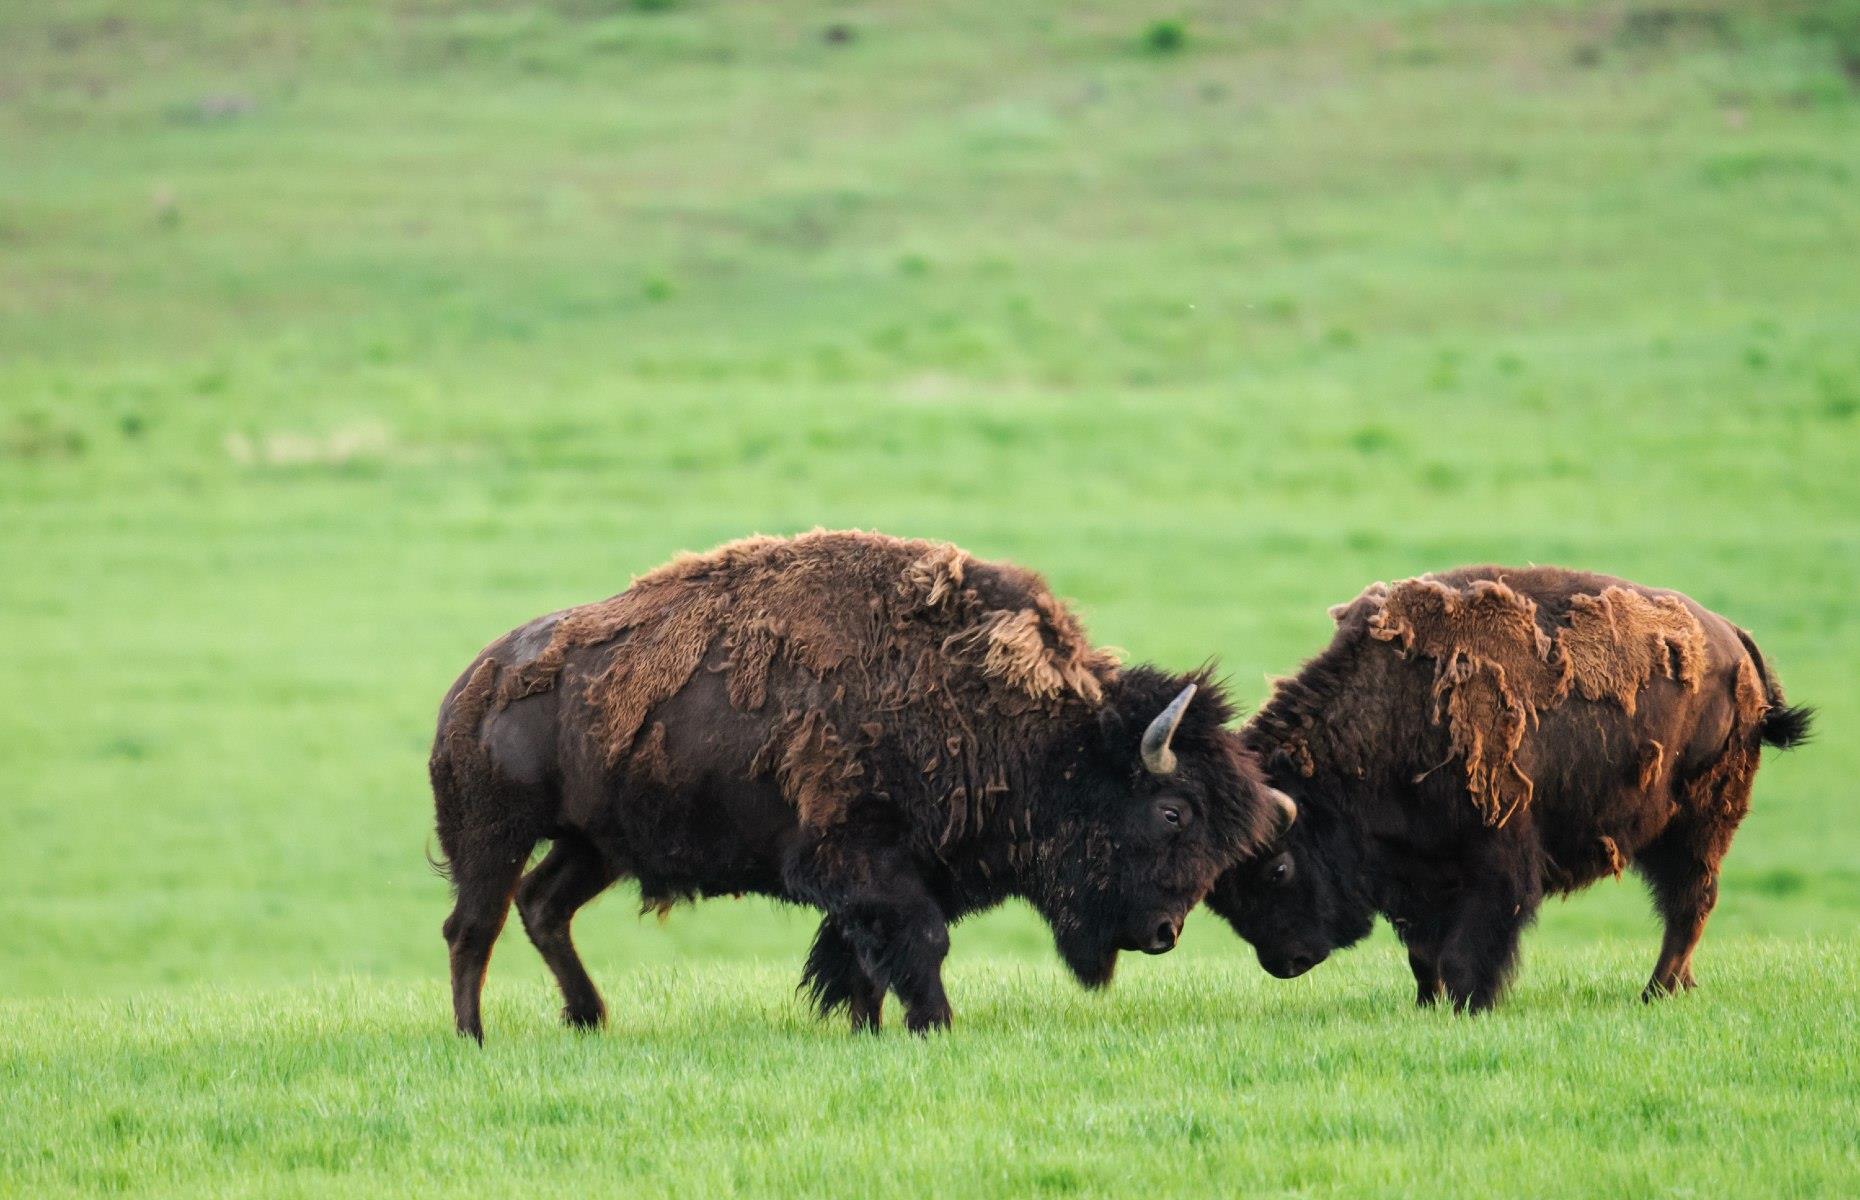 <p>There are no guided wildlife tours at Grasslands National Park, but visitors can take the Ecotour Scenic Drive or the Timbergulch Trail on foot to find the herd (keep a distance of at least 328 feet/100m). Elsewhere in the province, Wanuskewin Heritage Park has its own clan of bison, who welcomed their first calf in 2020 – the first time a baby bison had been born on this land since 1876. Wanuskewin has been a gathering place for all nations of the Northern Plains for over 6,400 years, and its present bison herd are all descendants of the last 1,000 bison to roam the prairies.</p>